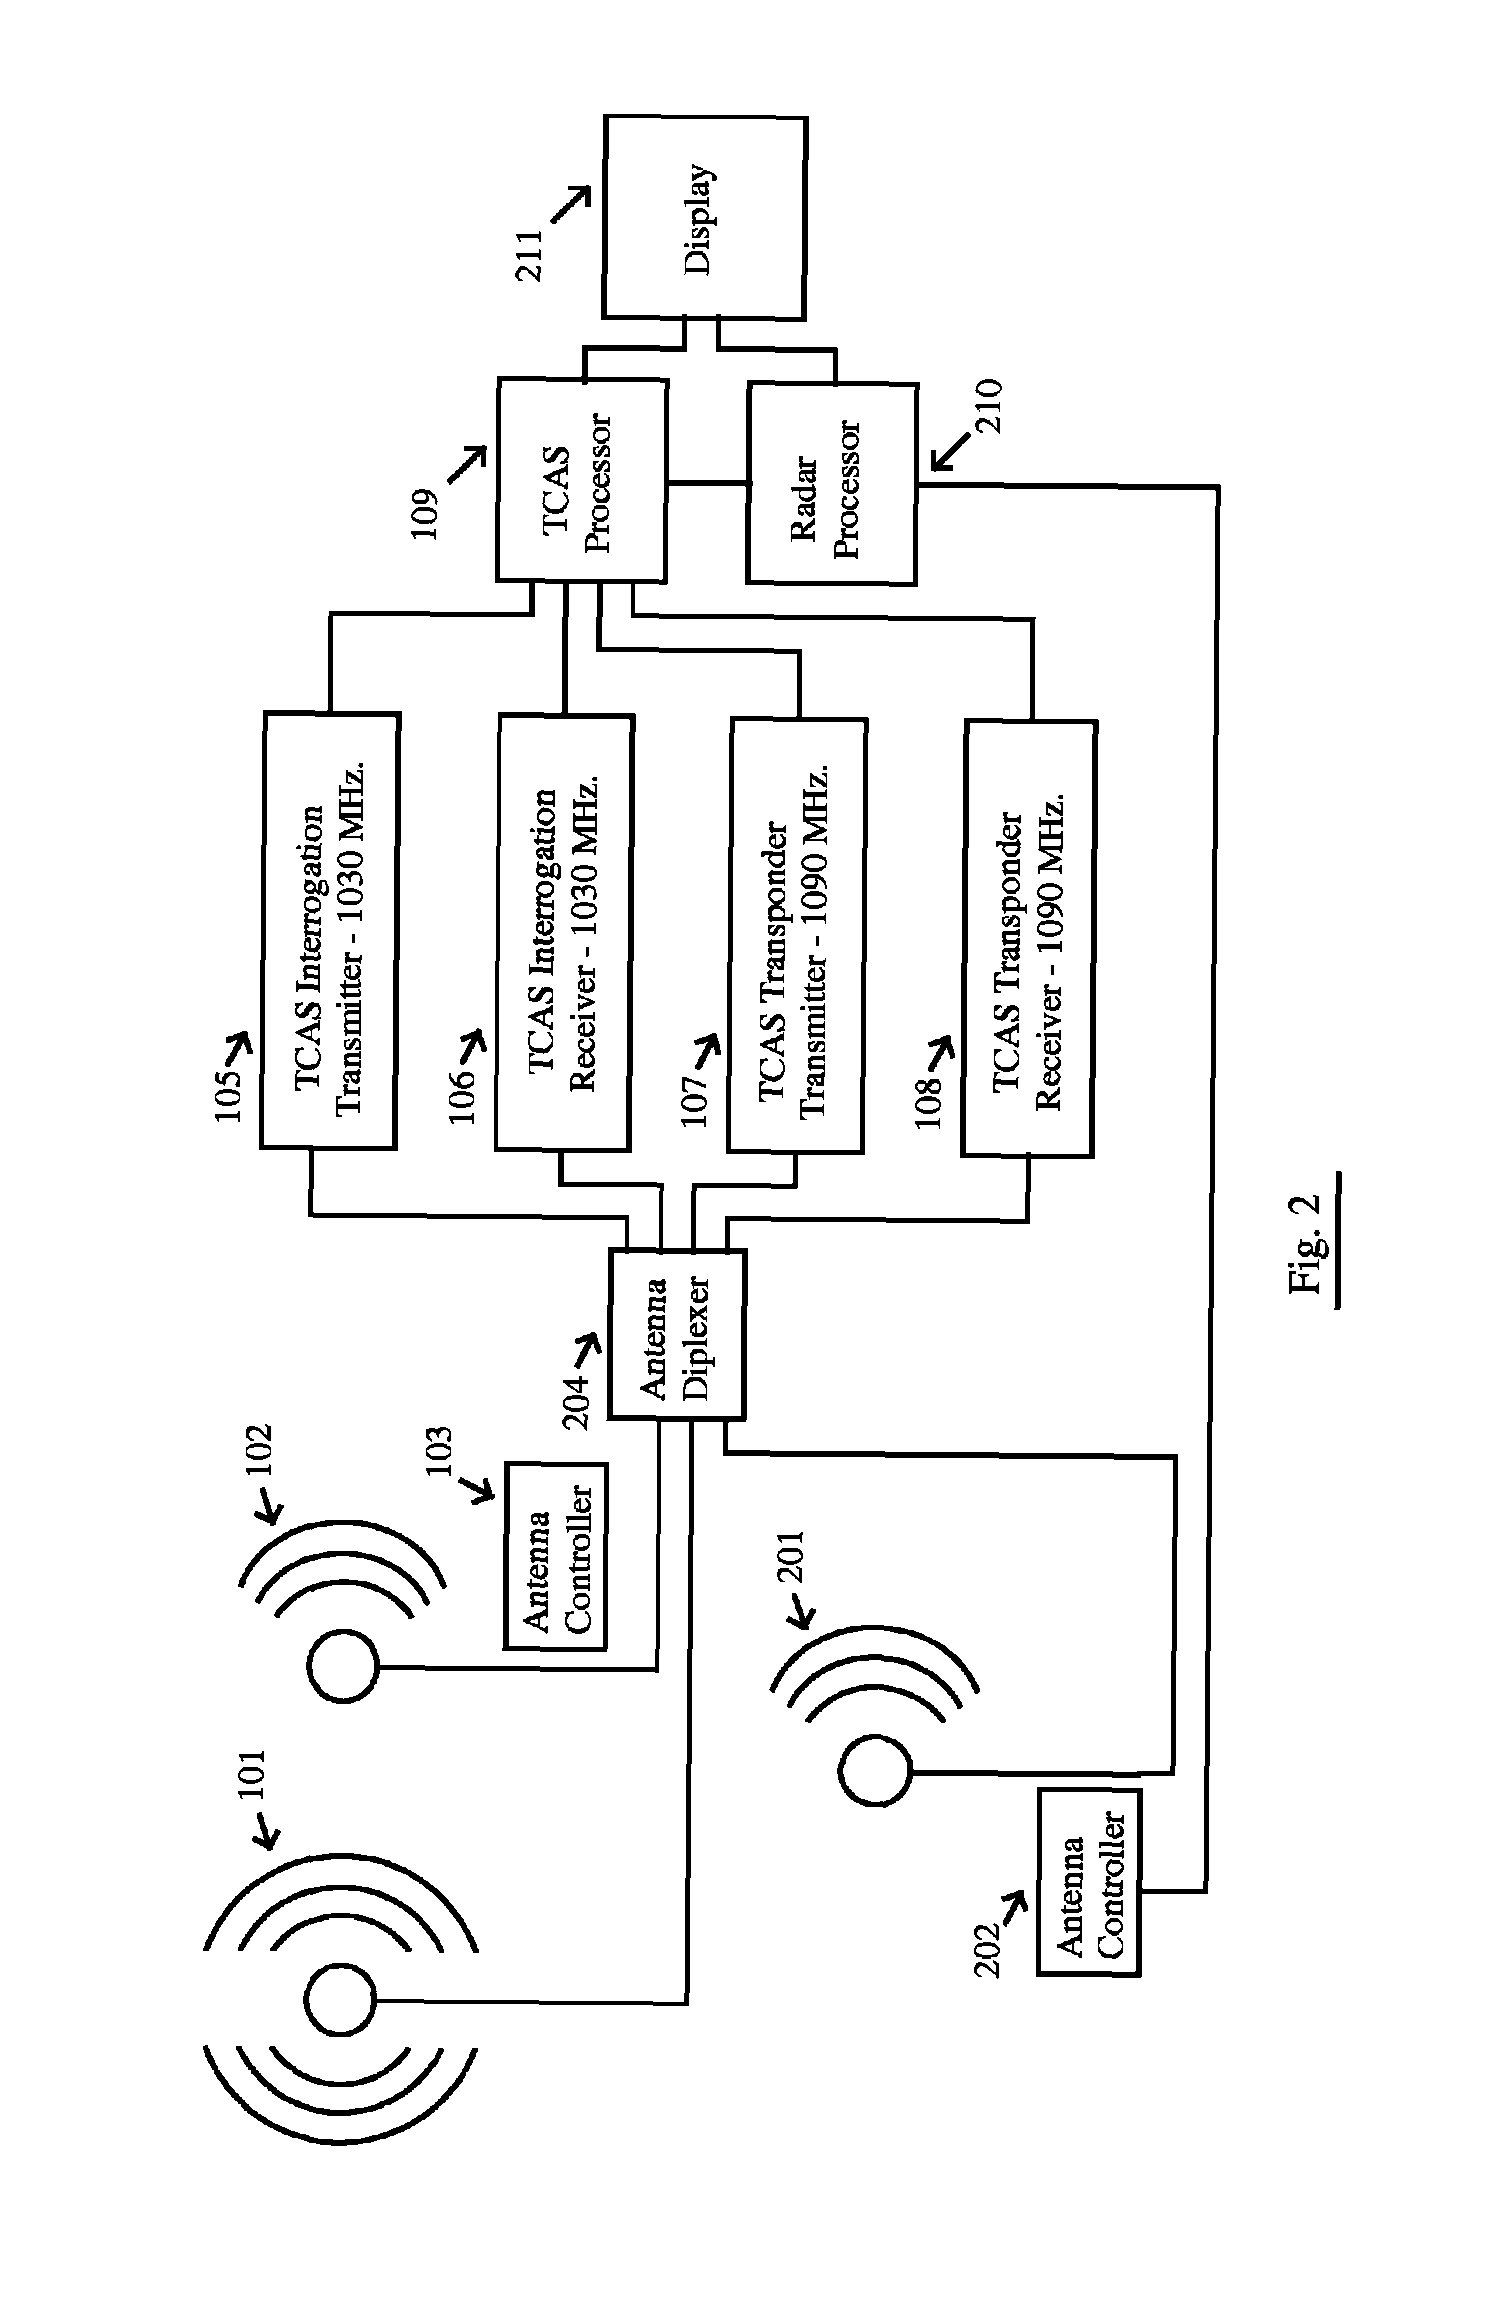 System for sensing aircraft and other objects